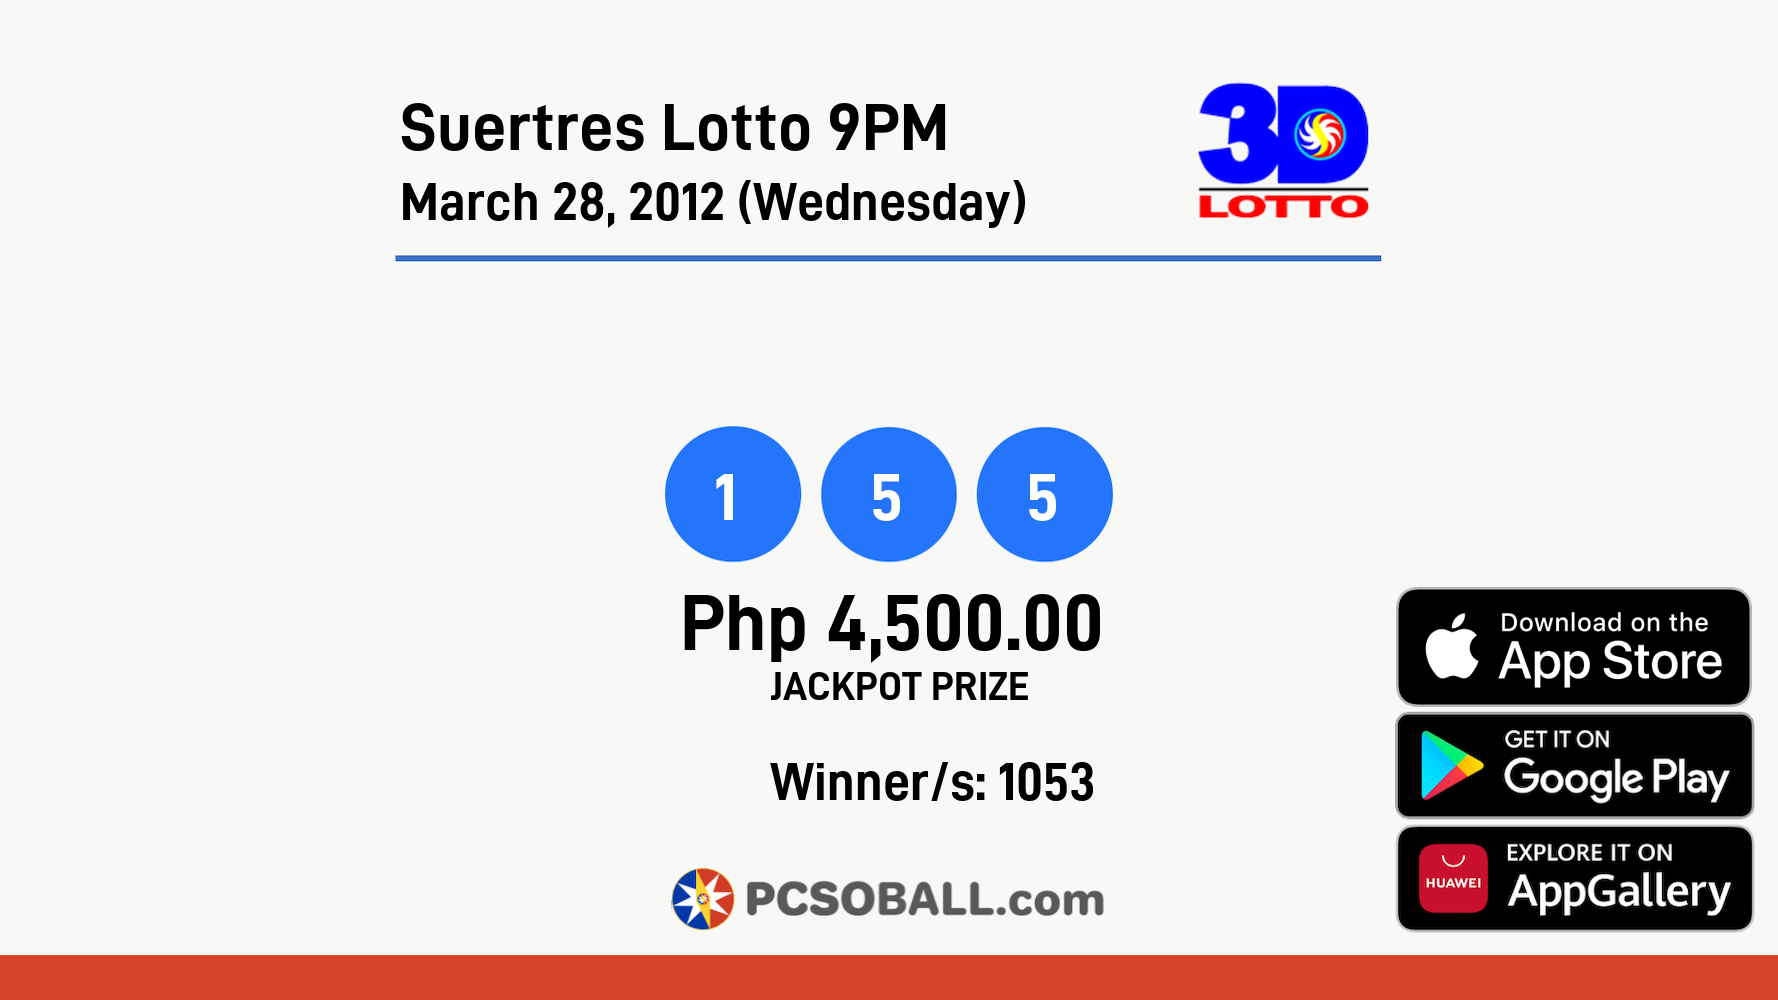 Suertres Lotto 9PM March 28, 2012 (Wednesday) Result